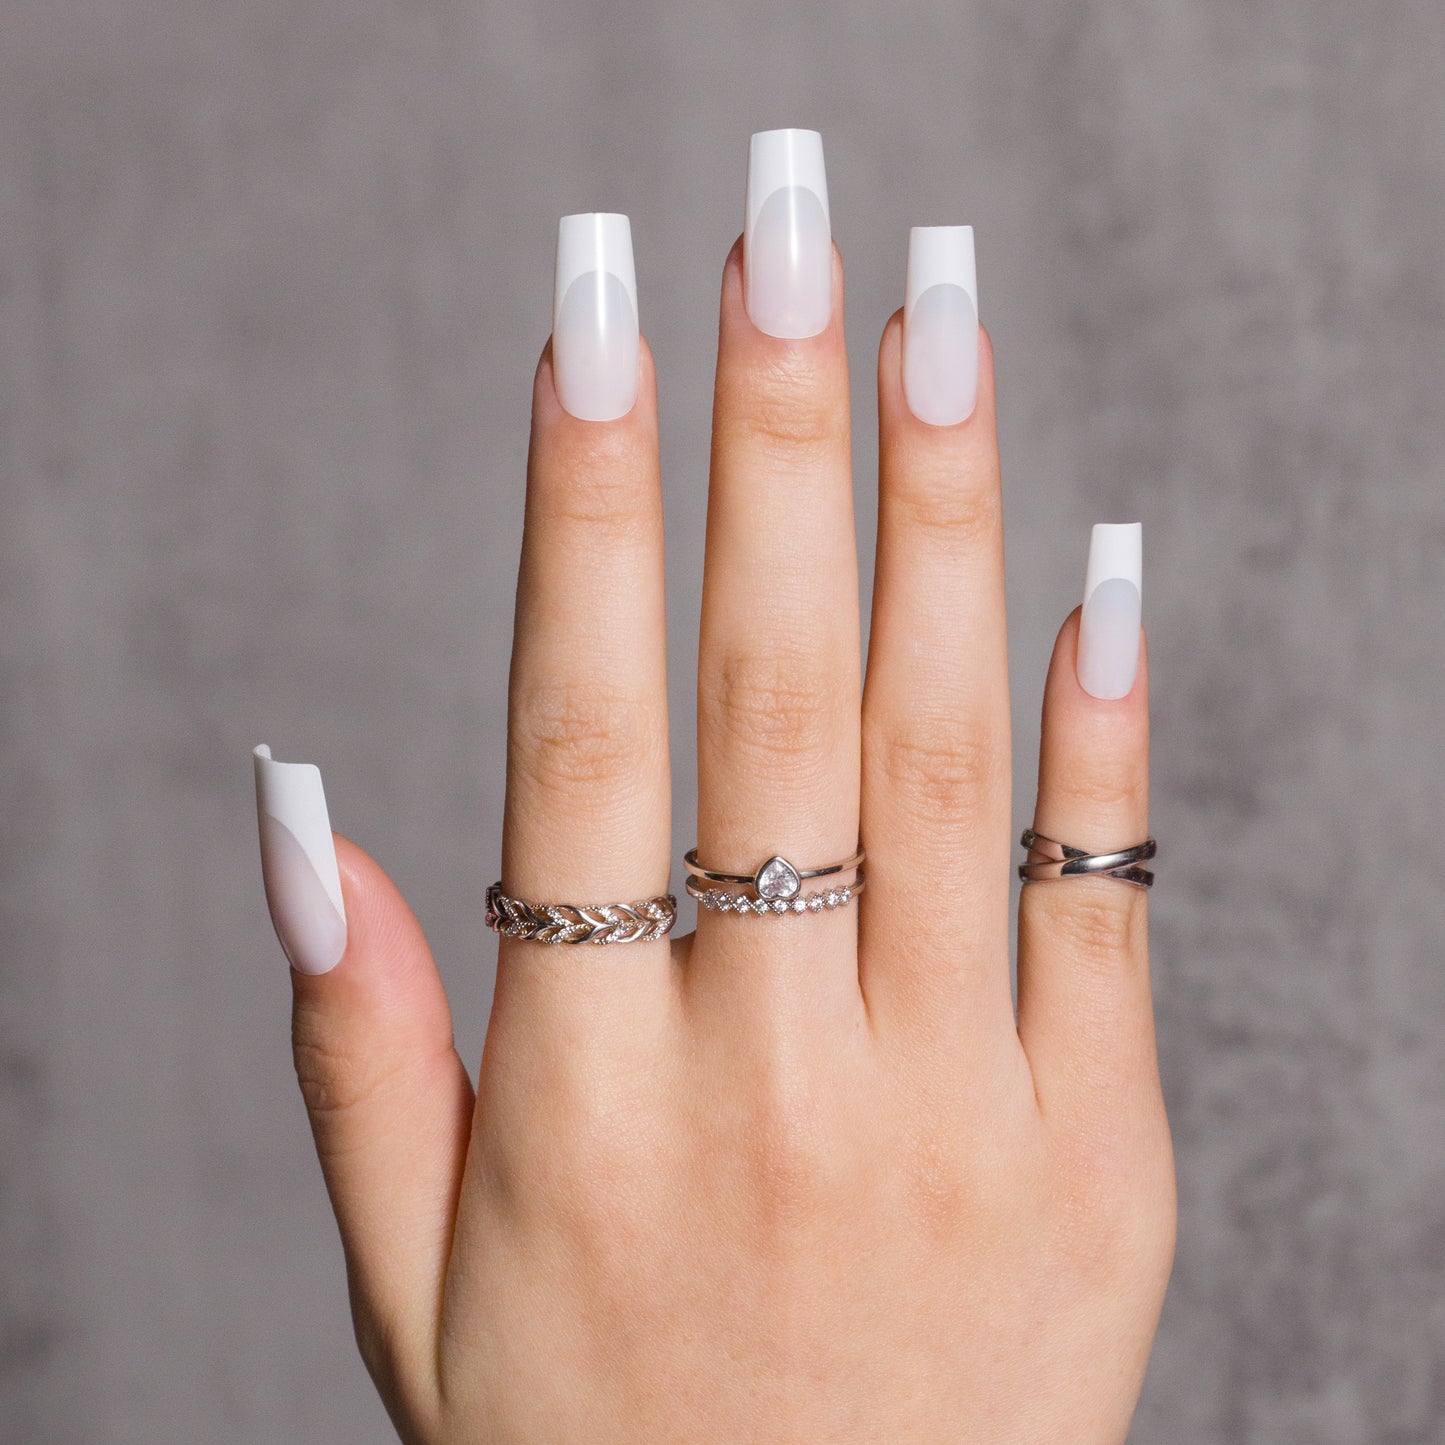 White French Tip Press On Nails